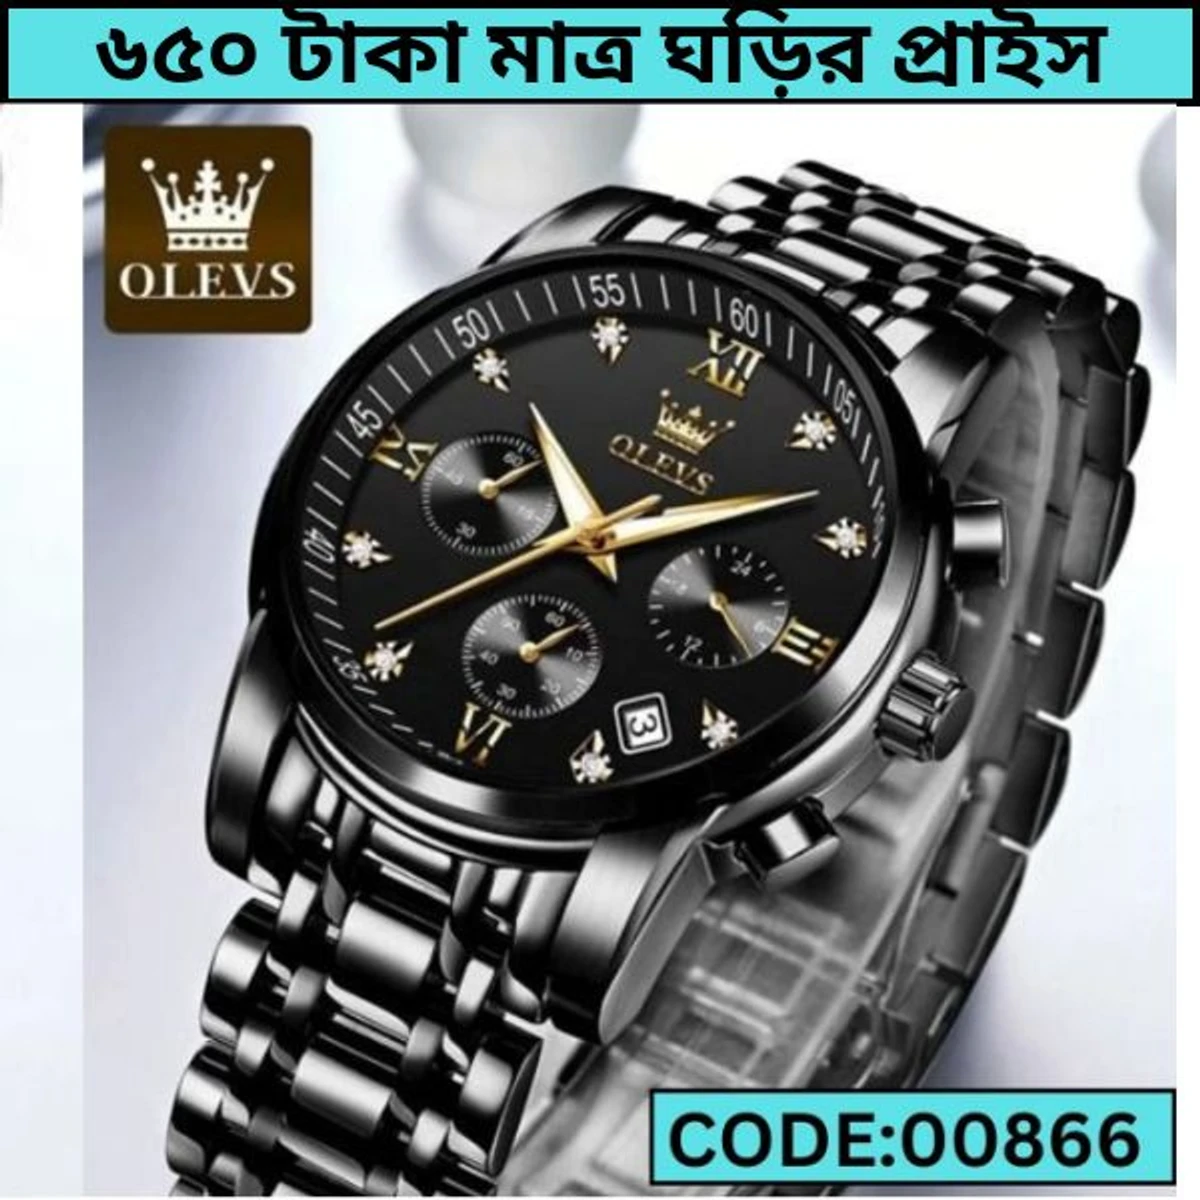 OLEVS MODEL 2858 Watch for Men Stainless Steel Watches - 2858 Full BLACK COOLER WATCH - MAN WATCH